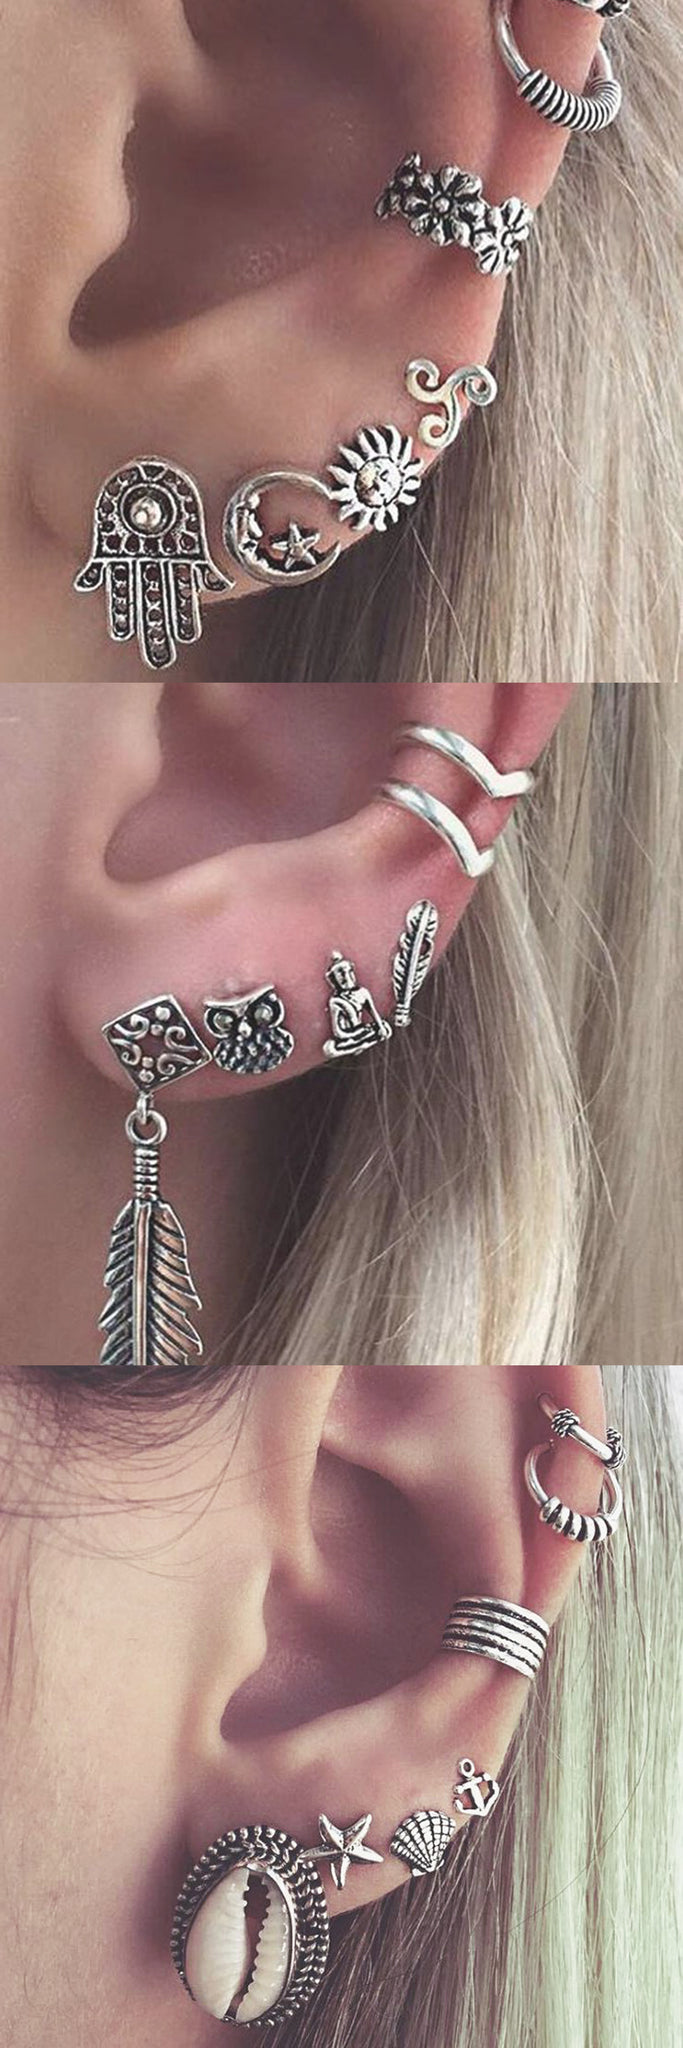 Tribal Boho Multiple Ear Piercing Ideas Combinations for Cartilage, Helix, Tragus, Rook, Daith, Conch - Aretes Oreja 